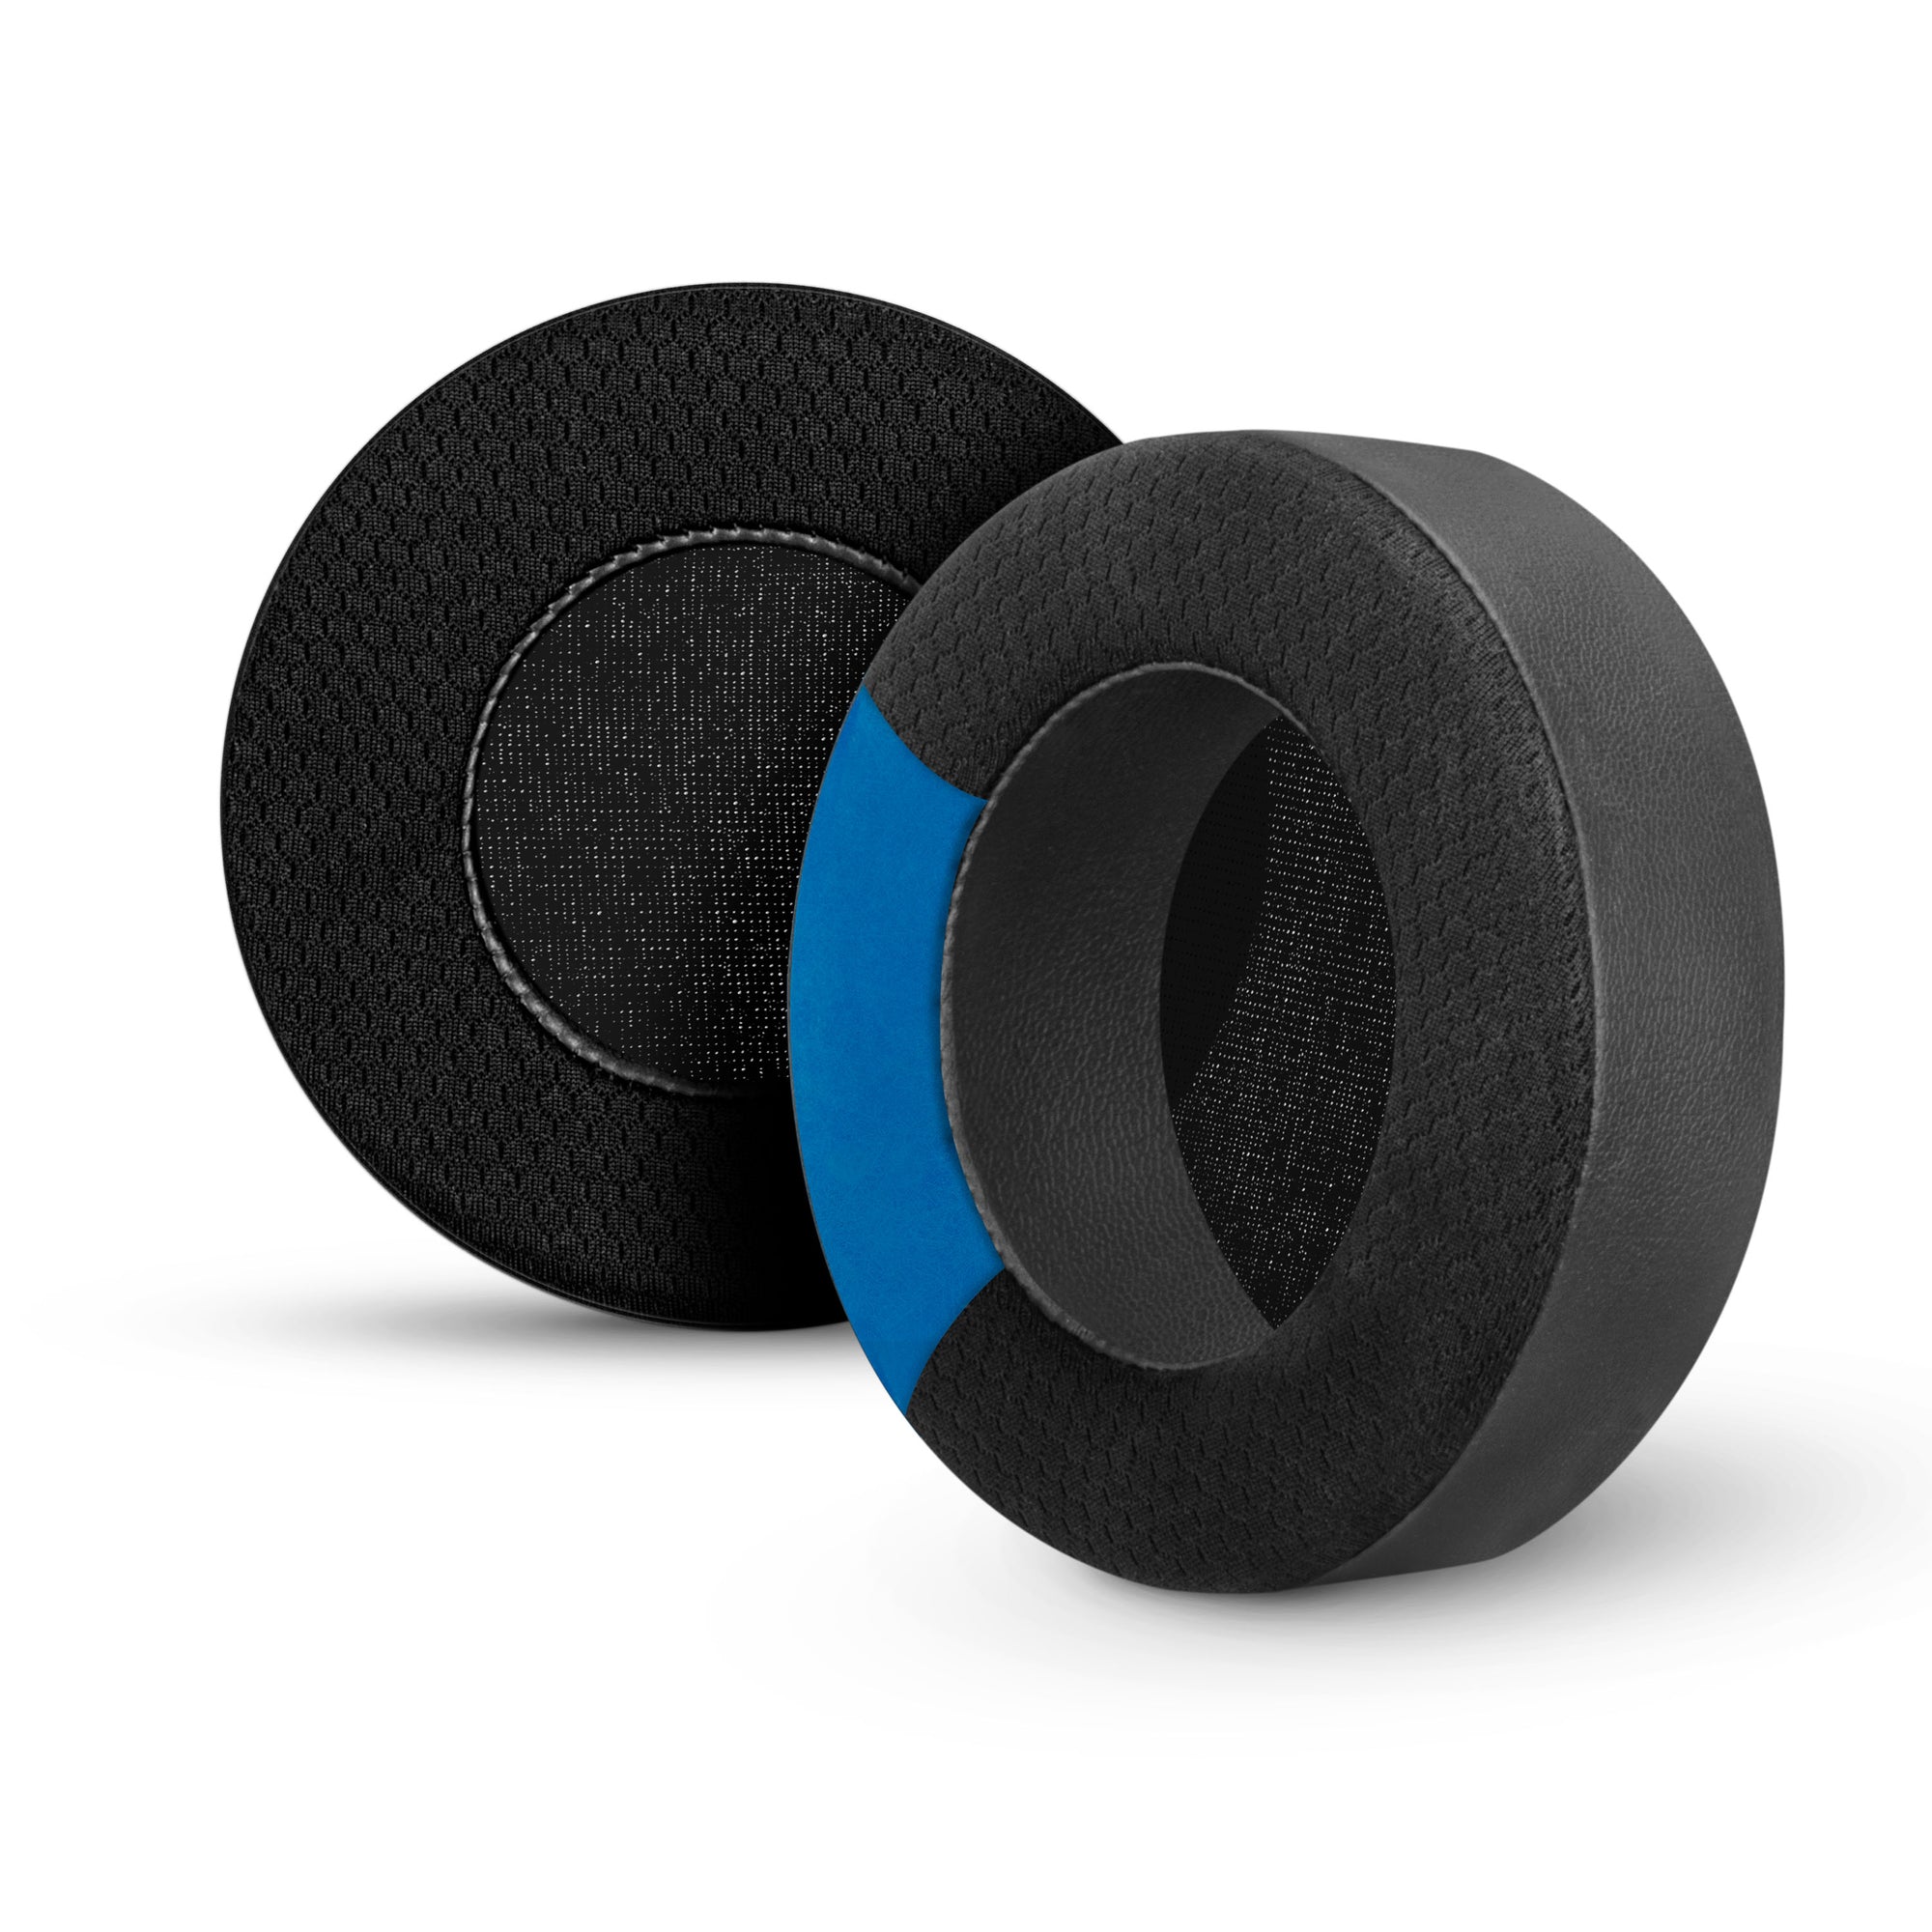 Hybrid Replacement Earpads for Corsair Virtuoso RGB Gaming Headset (Wireless/XT/SE) - Cooling Gel, Memory Foam, Durable, Thick & Sound Isolating